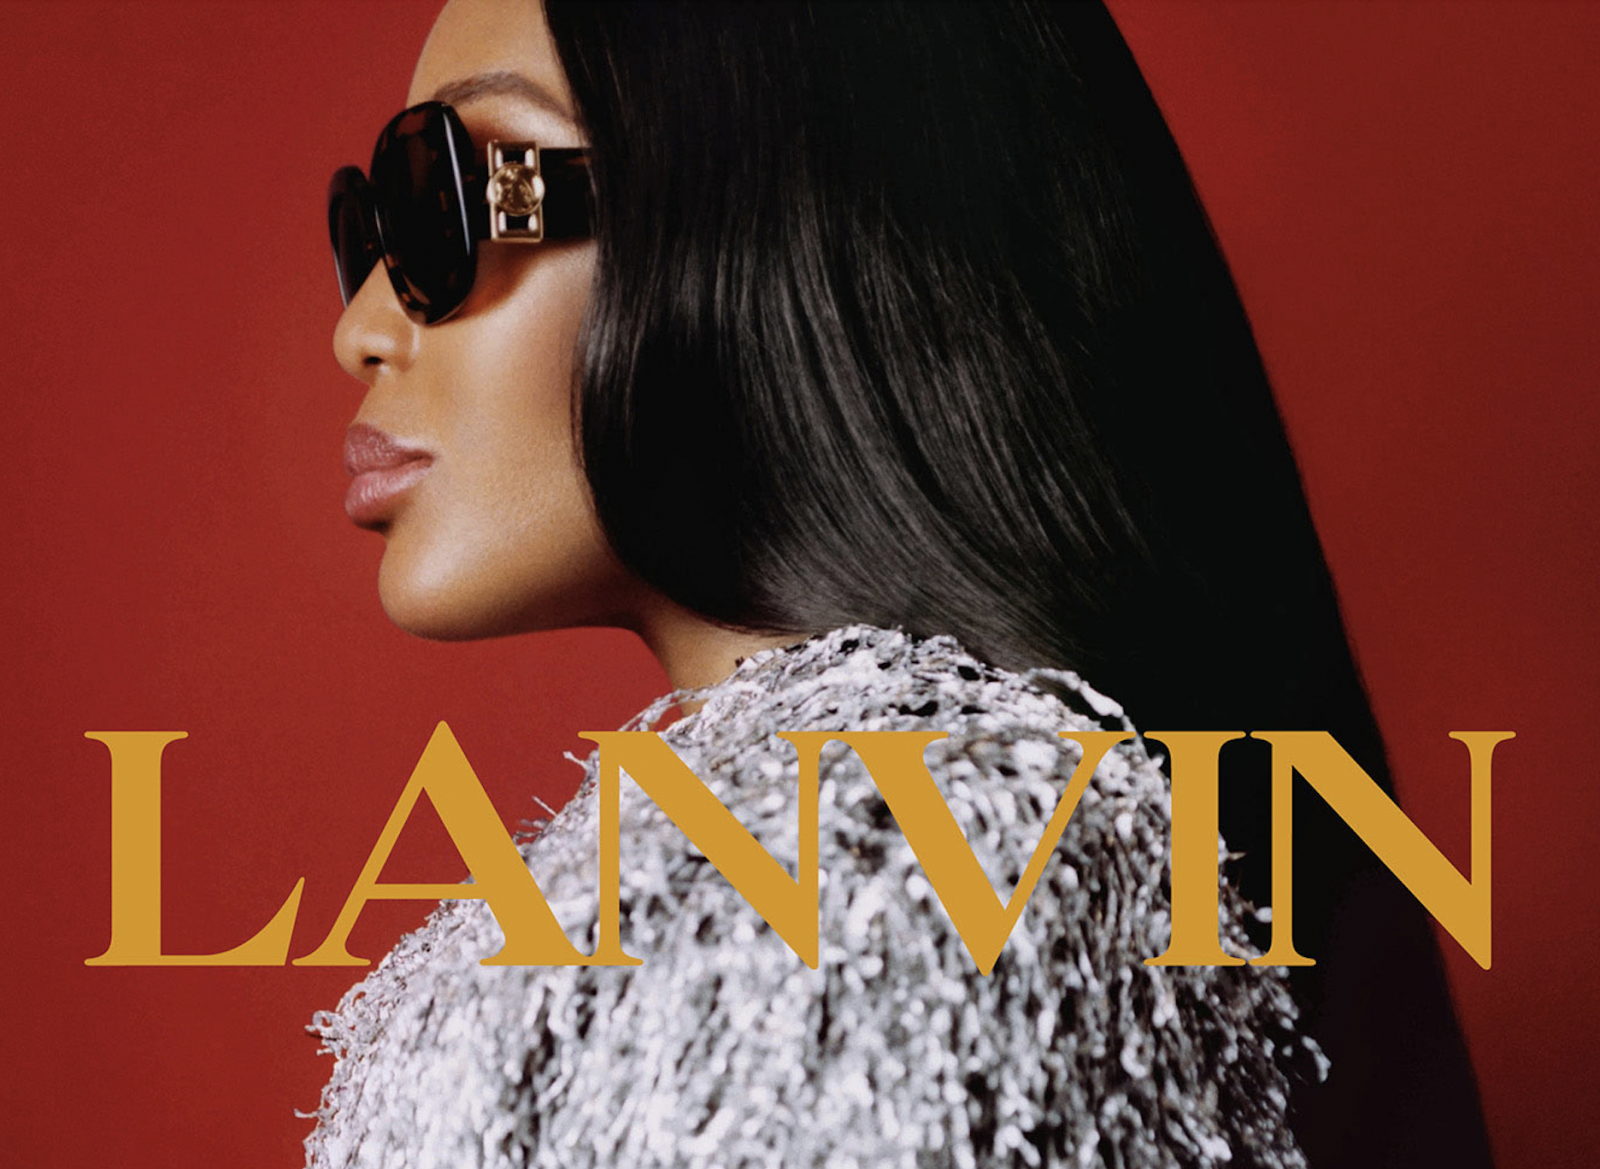 A Lanvin ad featuring Naomi Campbell